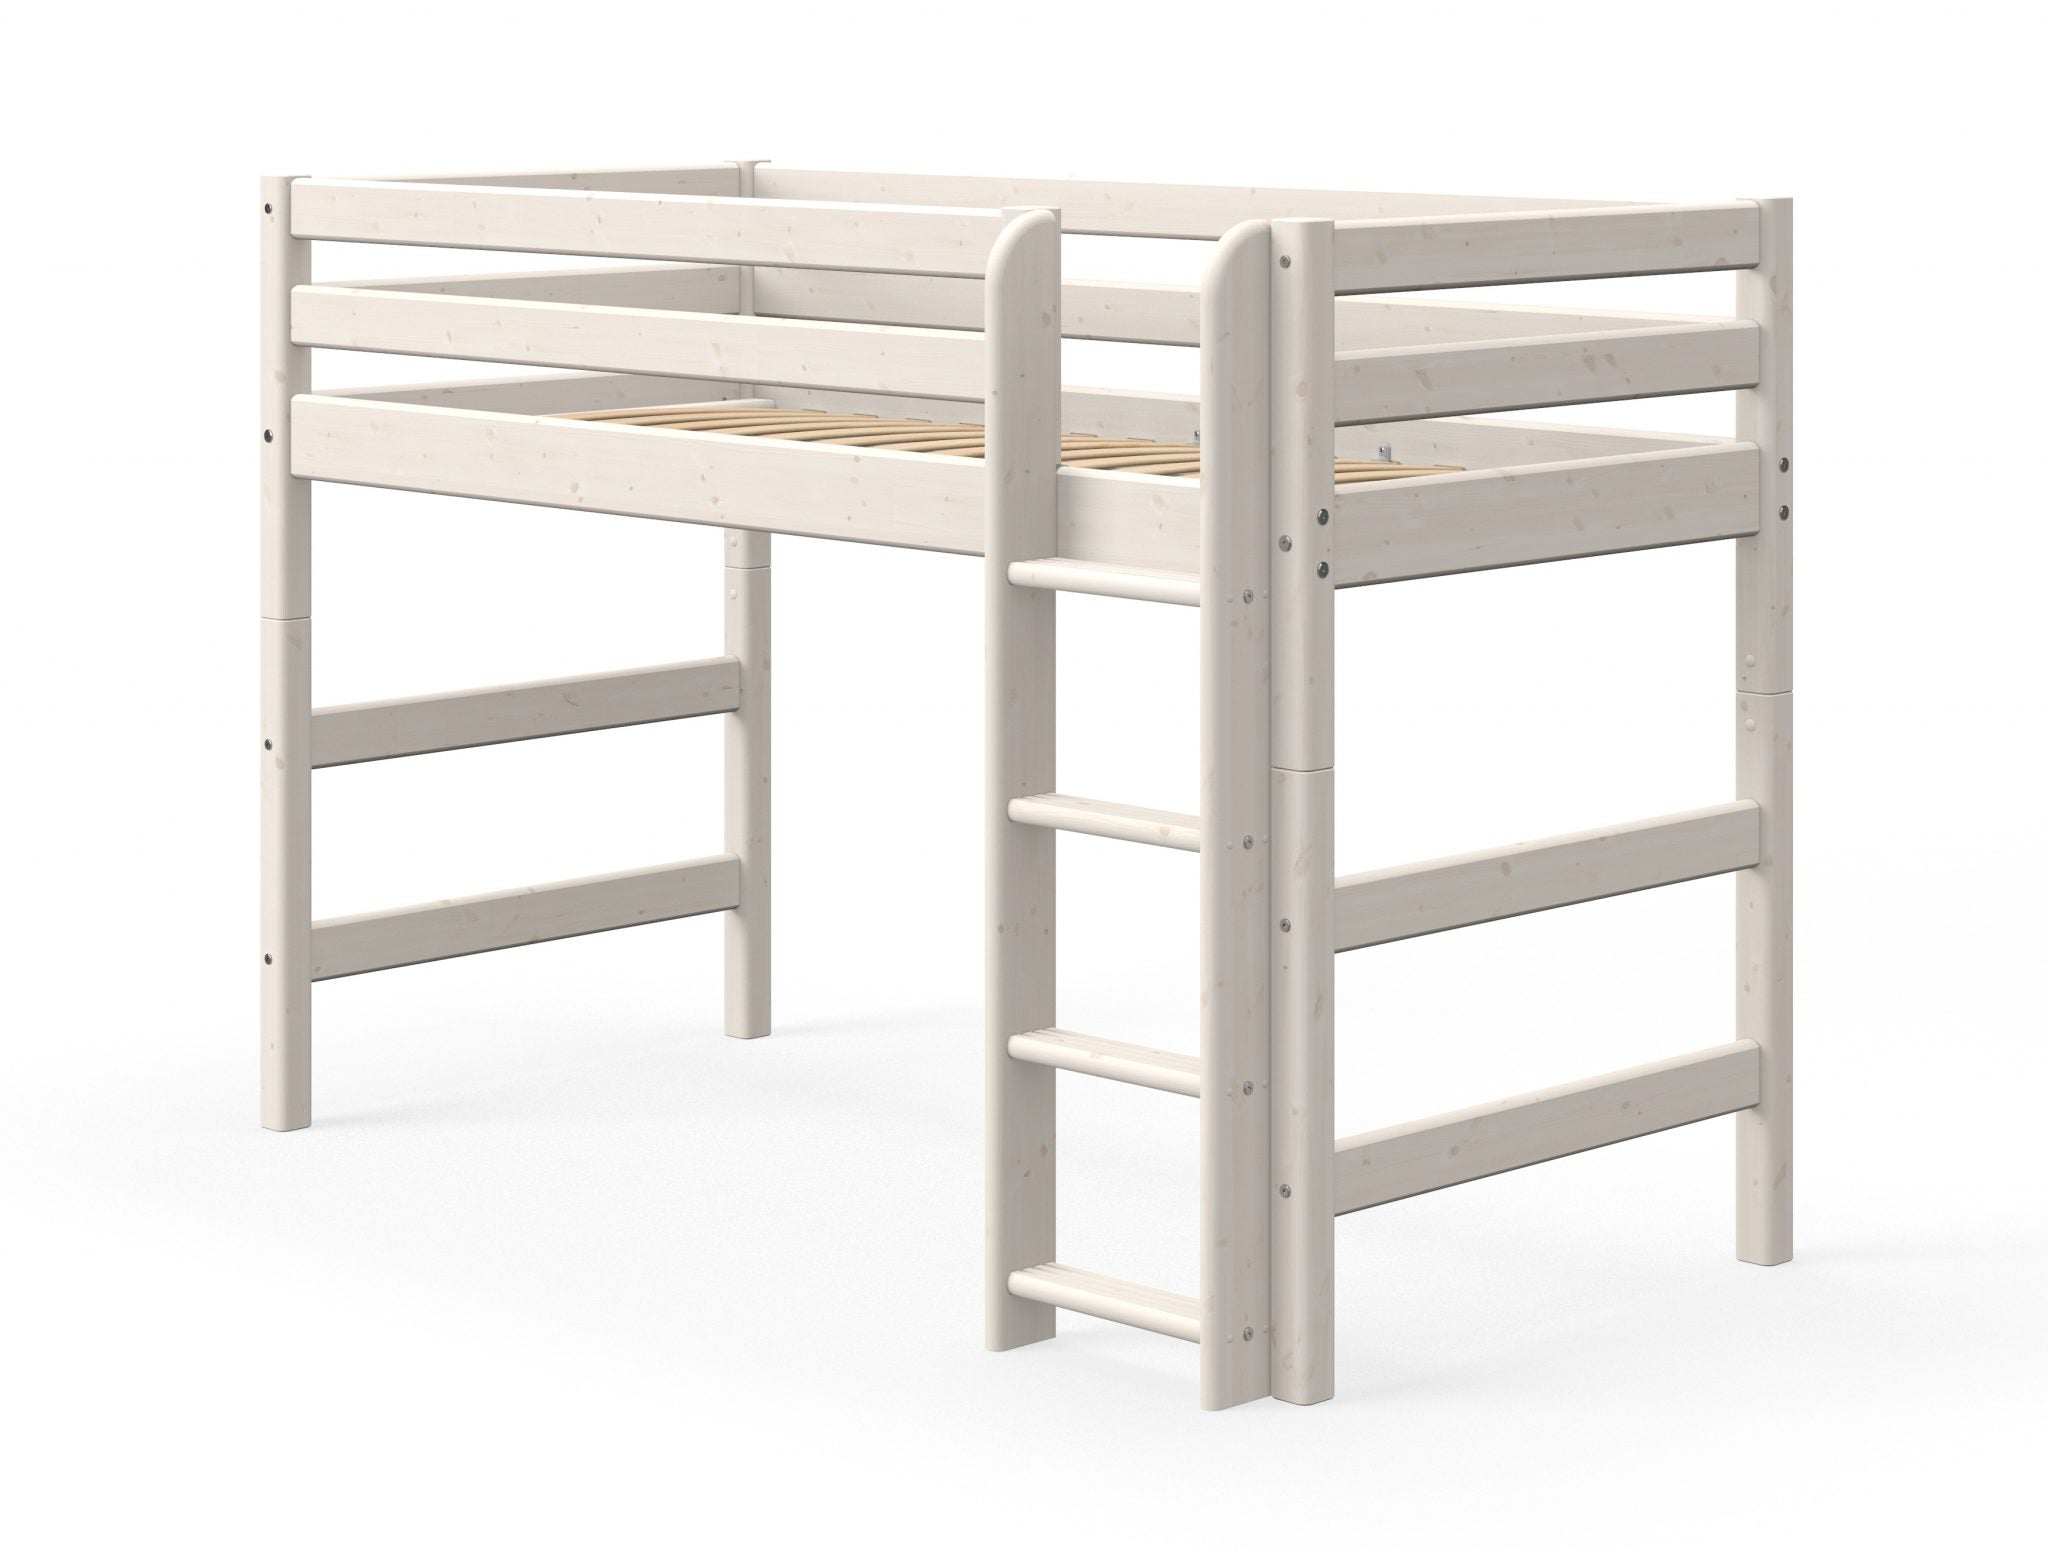 Flexa Classic Semi High bed – Available in 2 colours